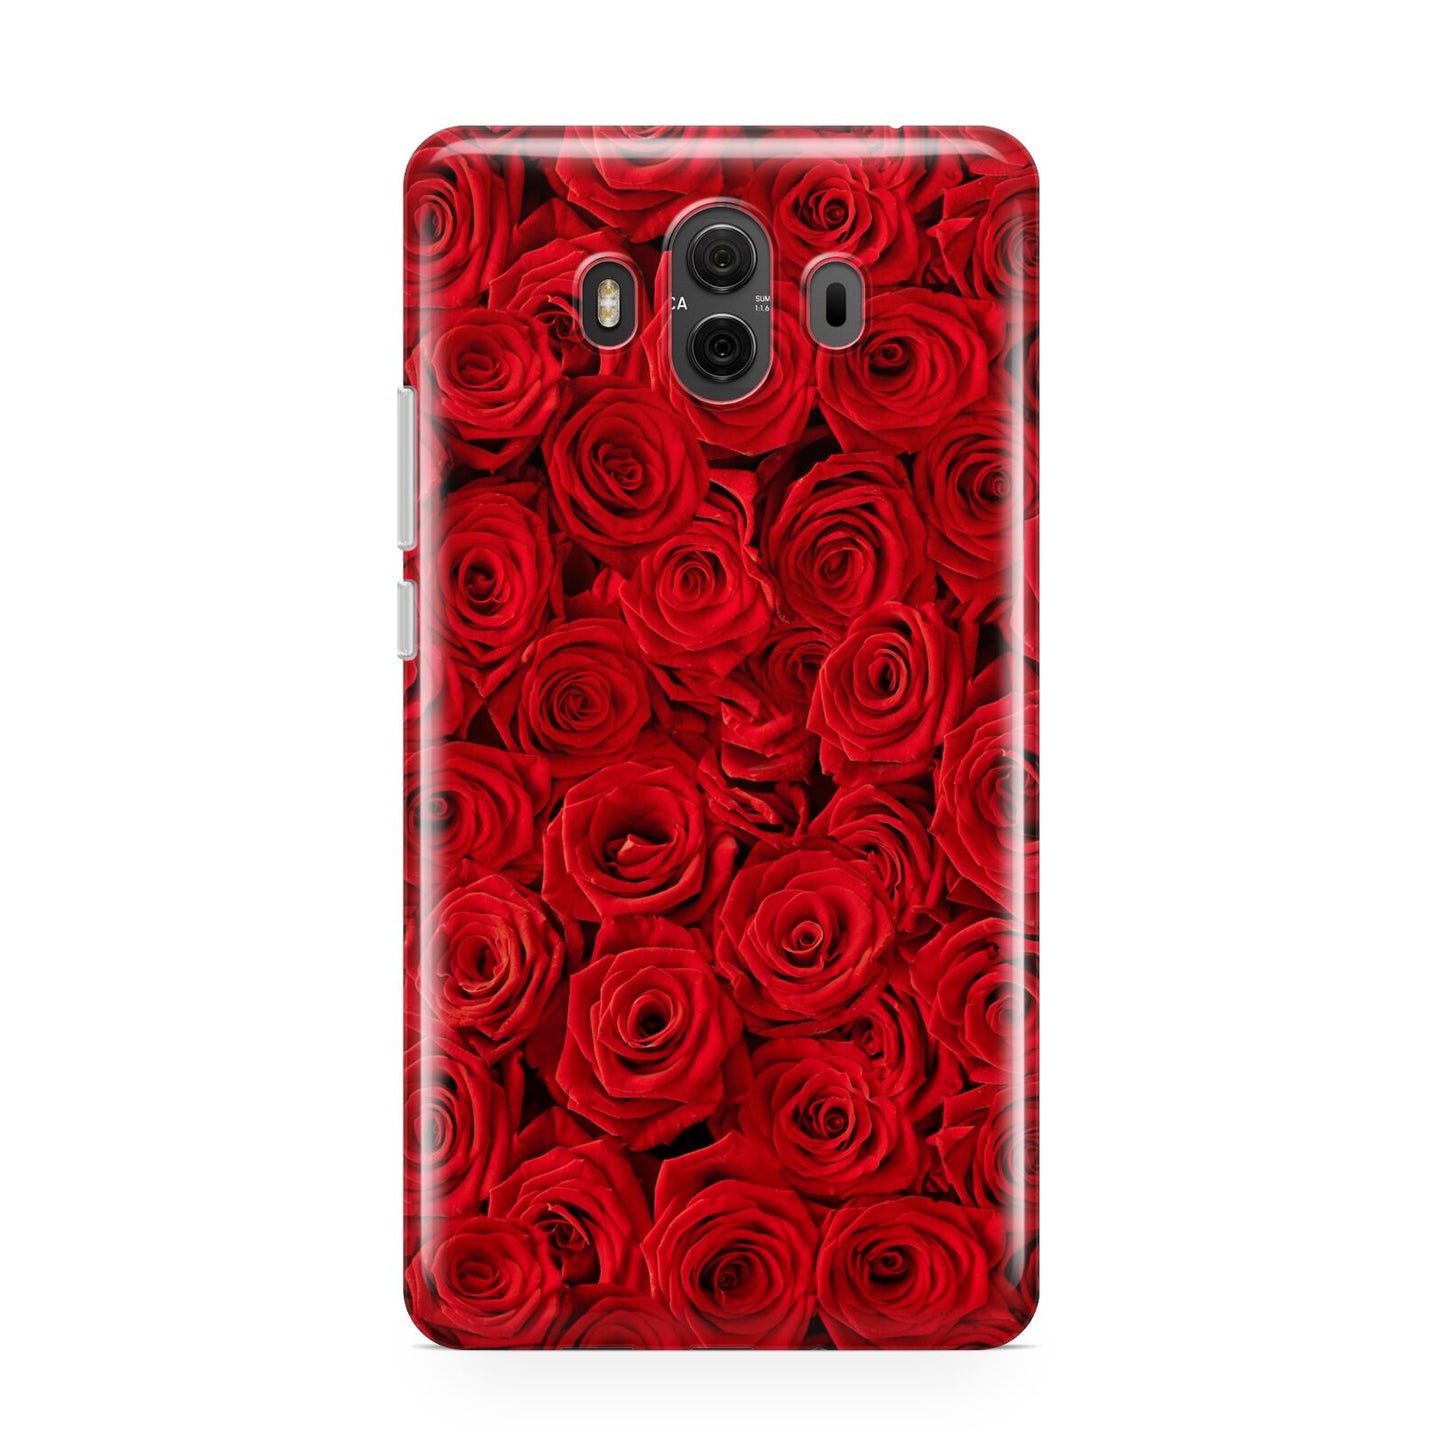 test THNG23 342 Huawei Mate 10 Protective Phone Case